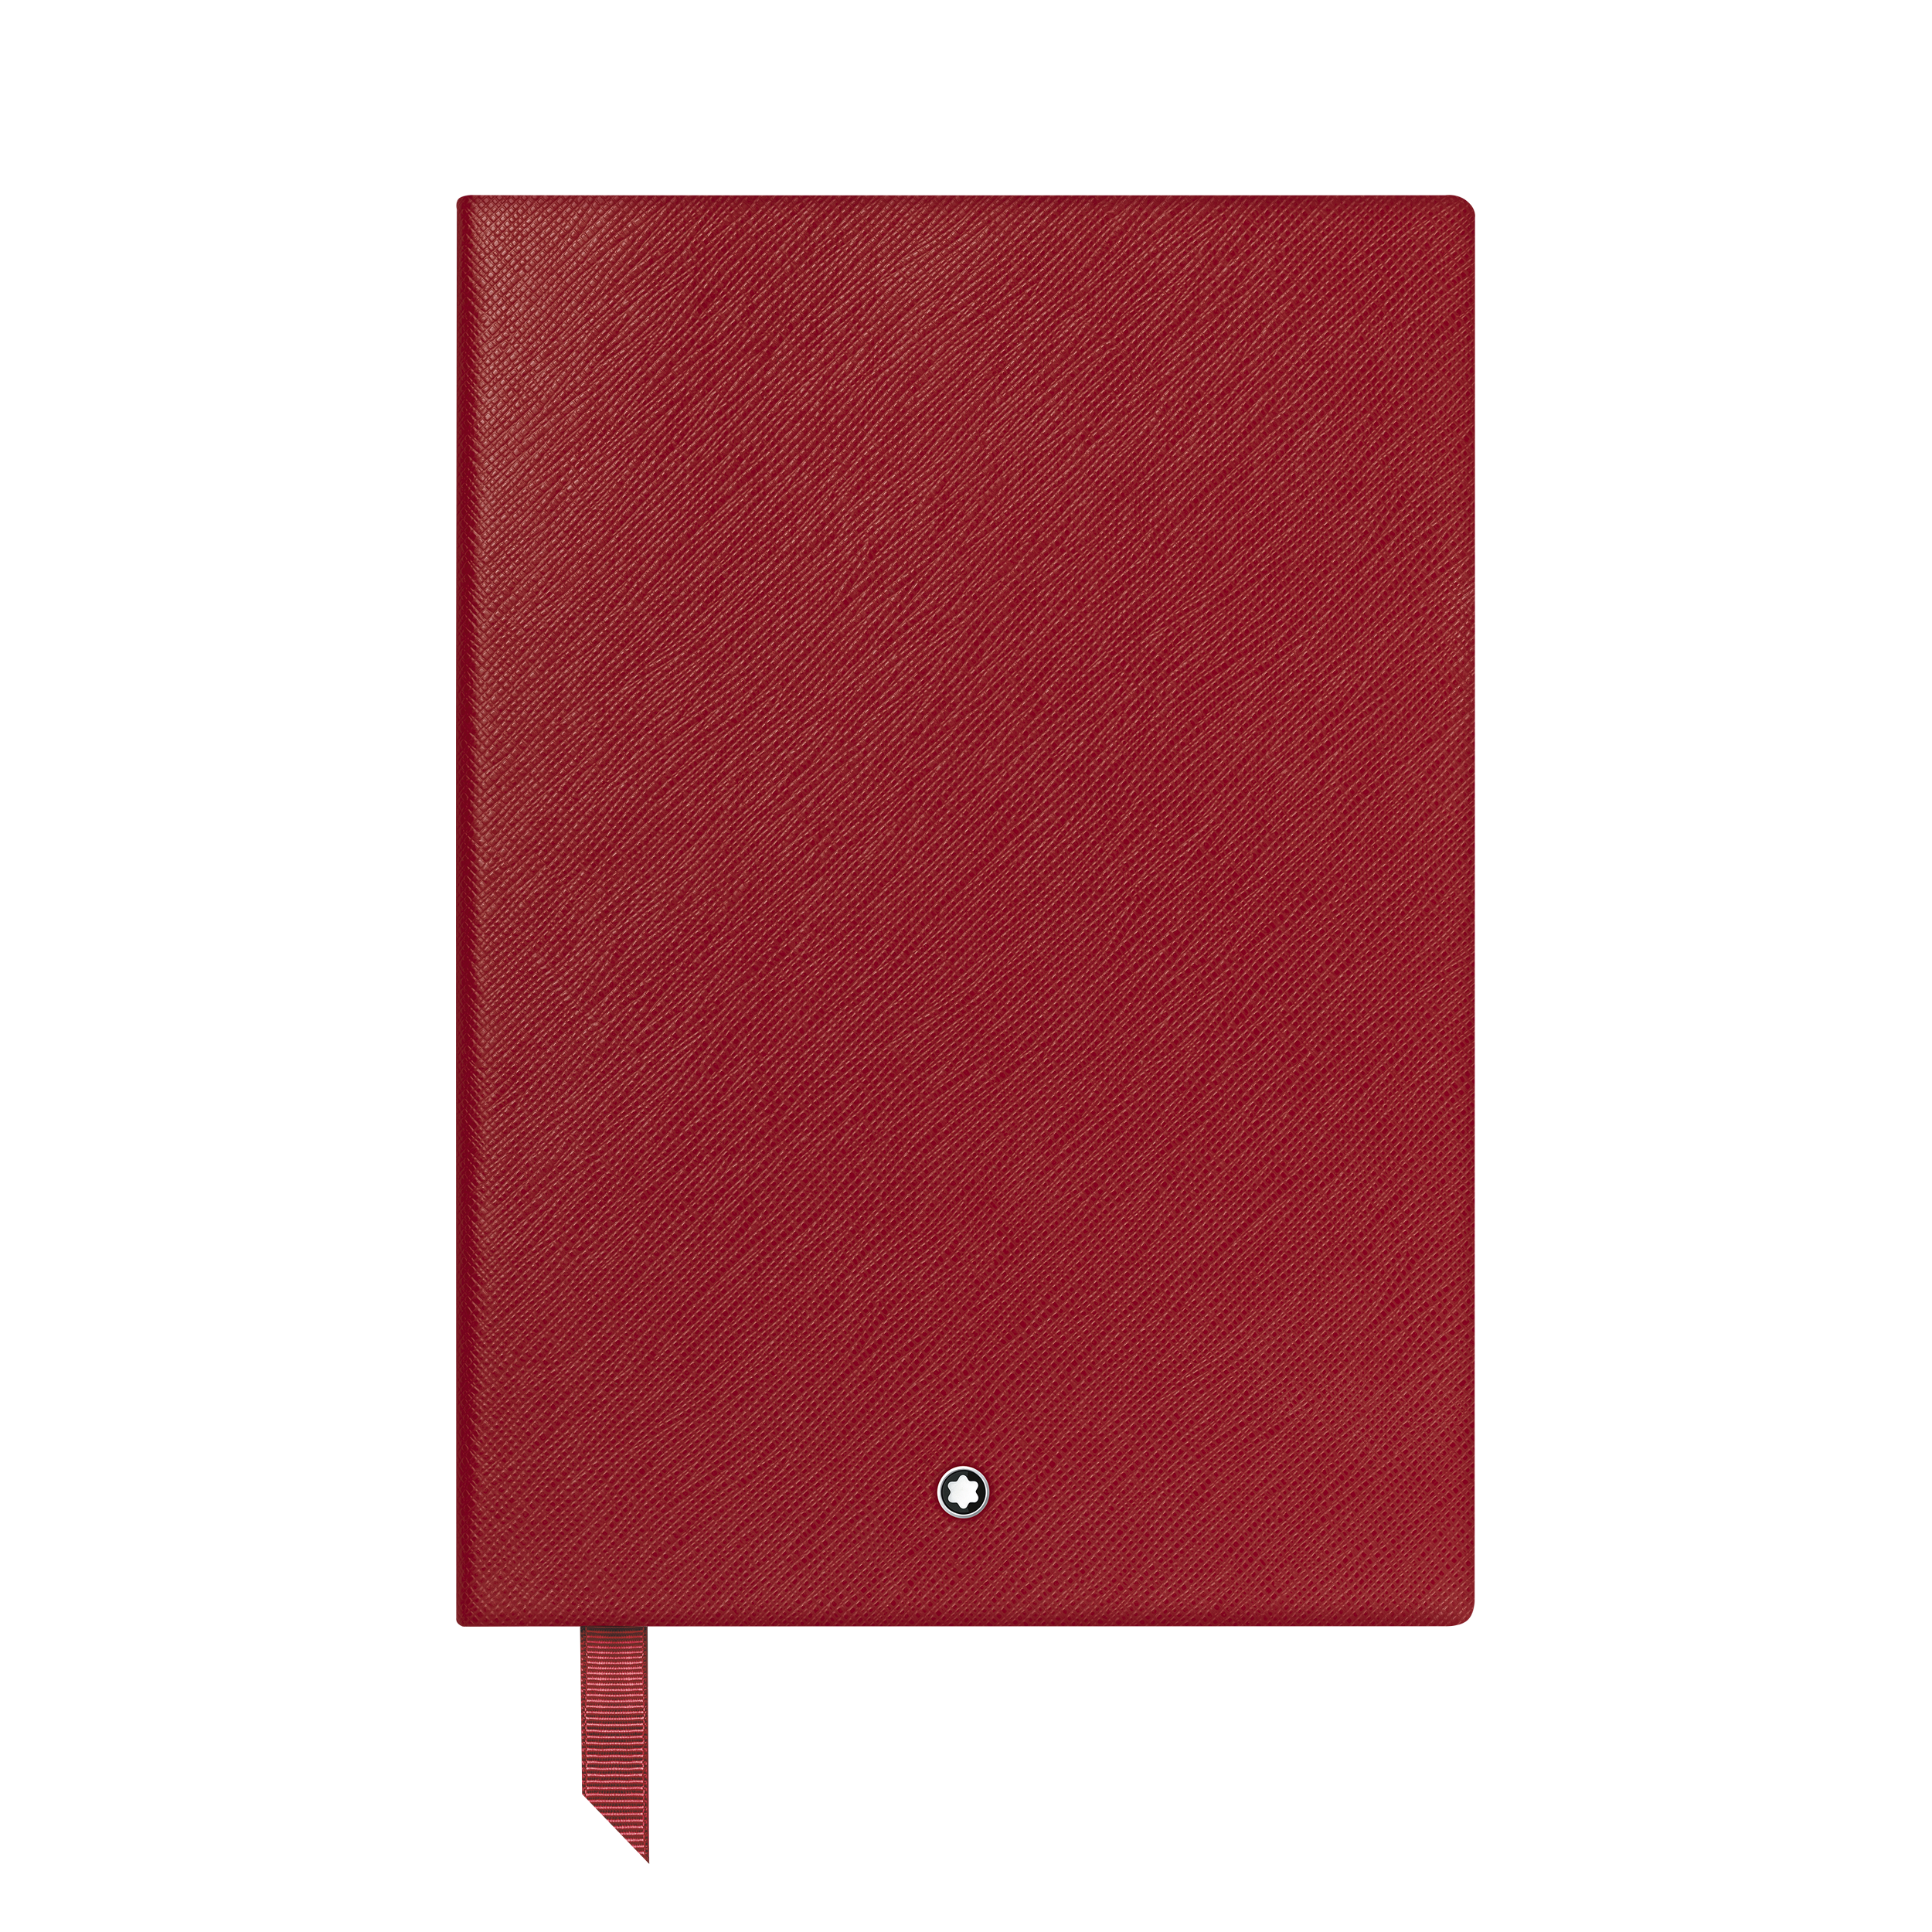 Montblanc Fine Stationery Notebook #146 Red, Lined, image 1